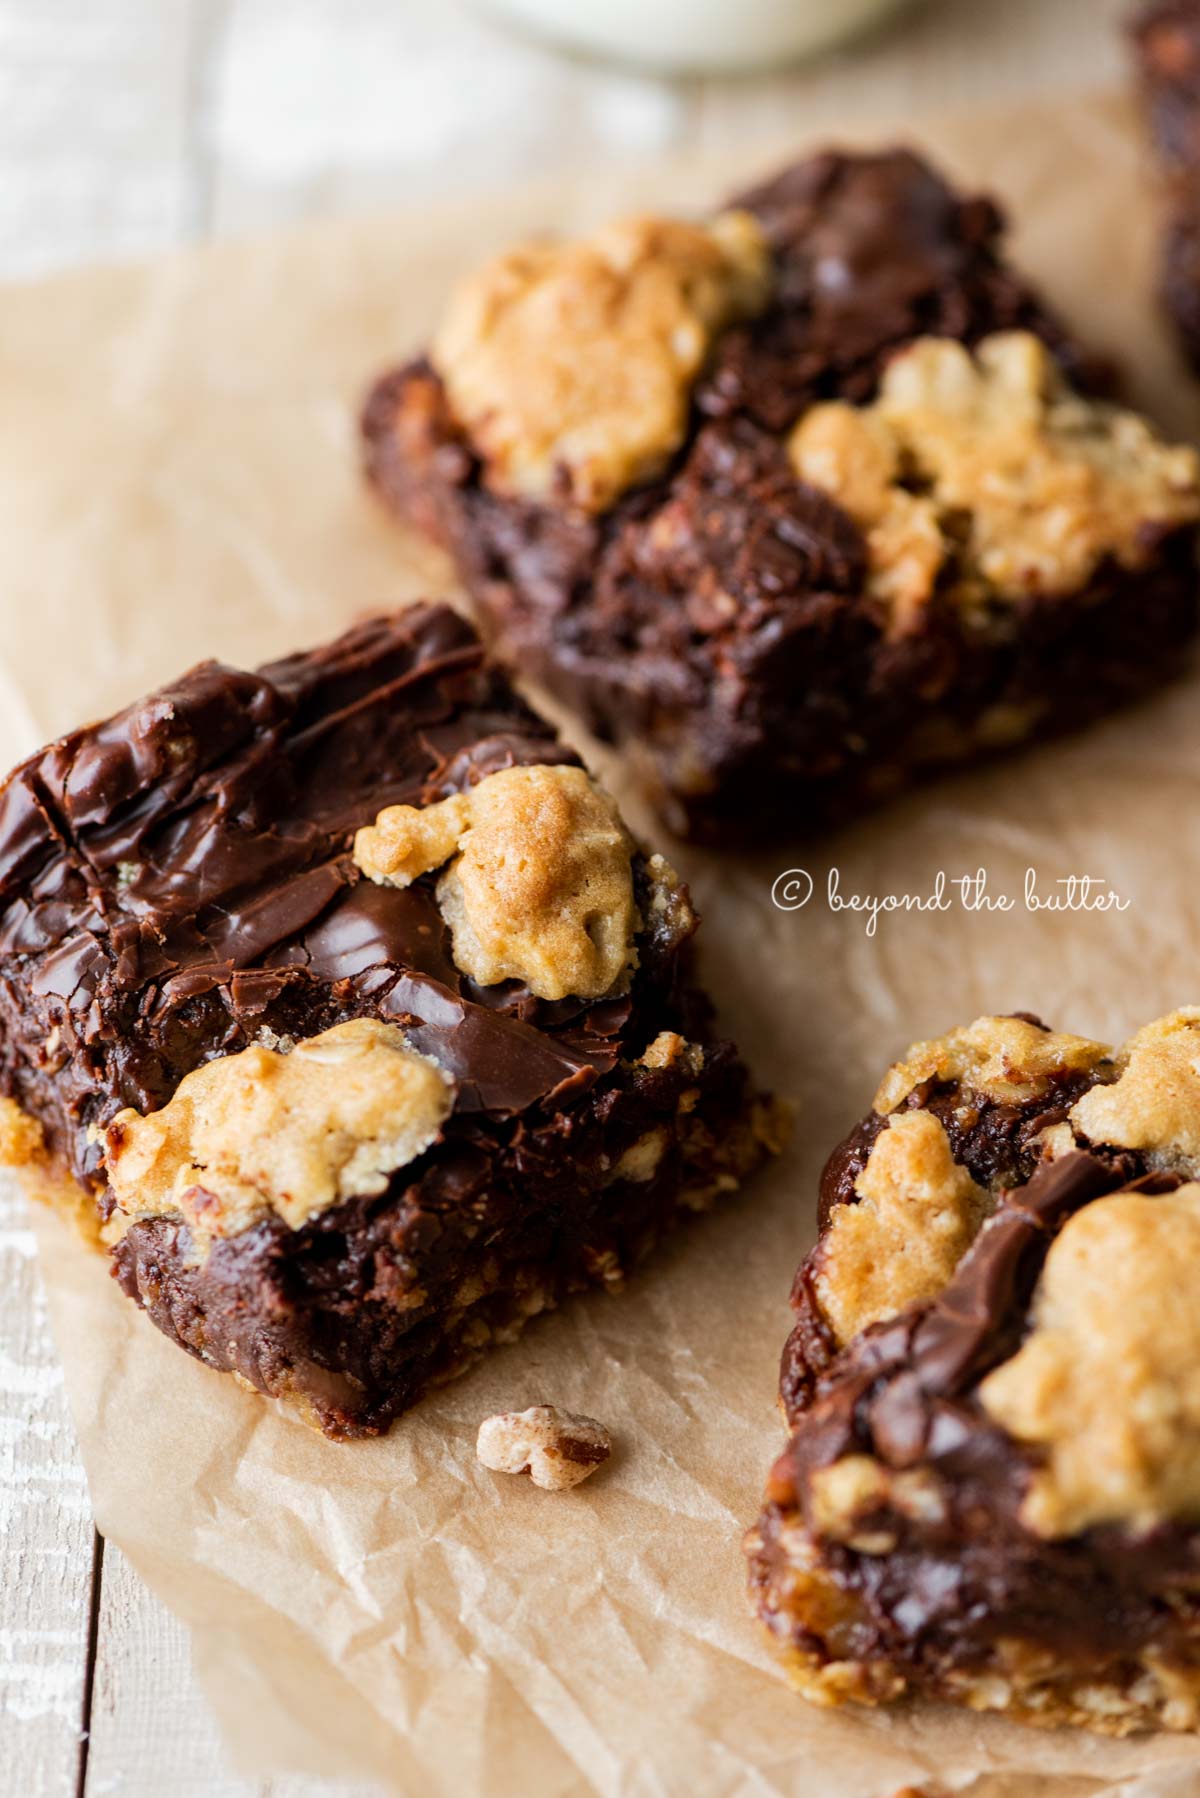 Classic oatmeal fudge bars on parchment paper | All Images © Beyond the Butter®